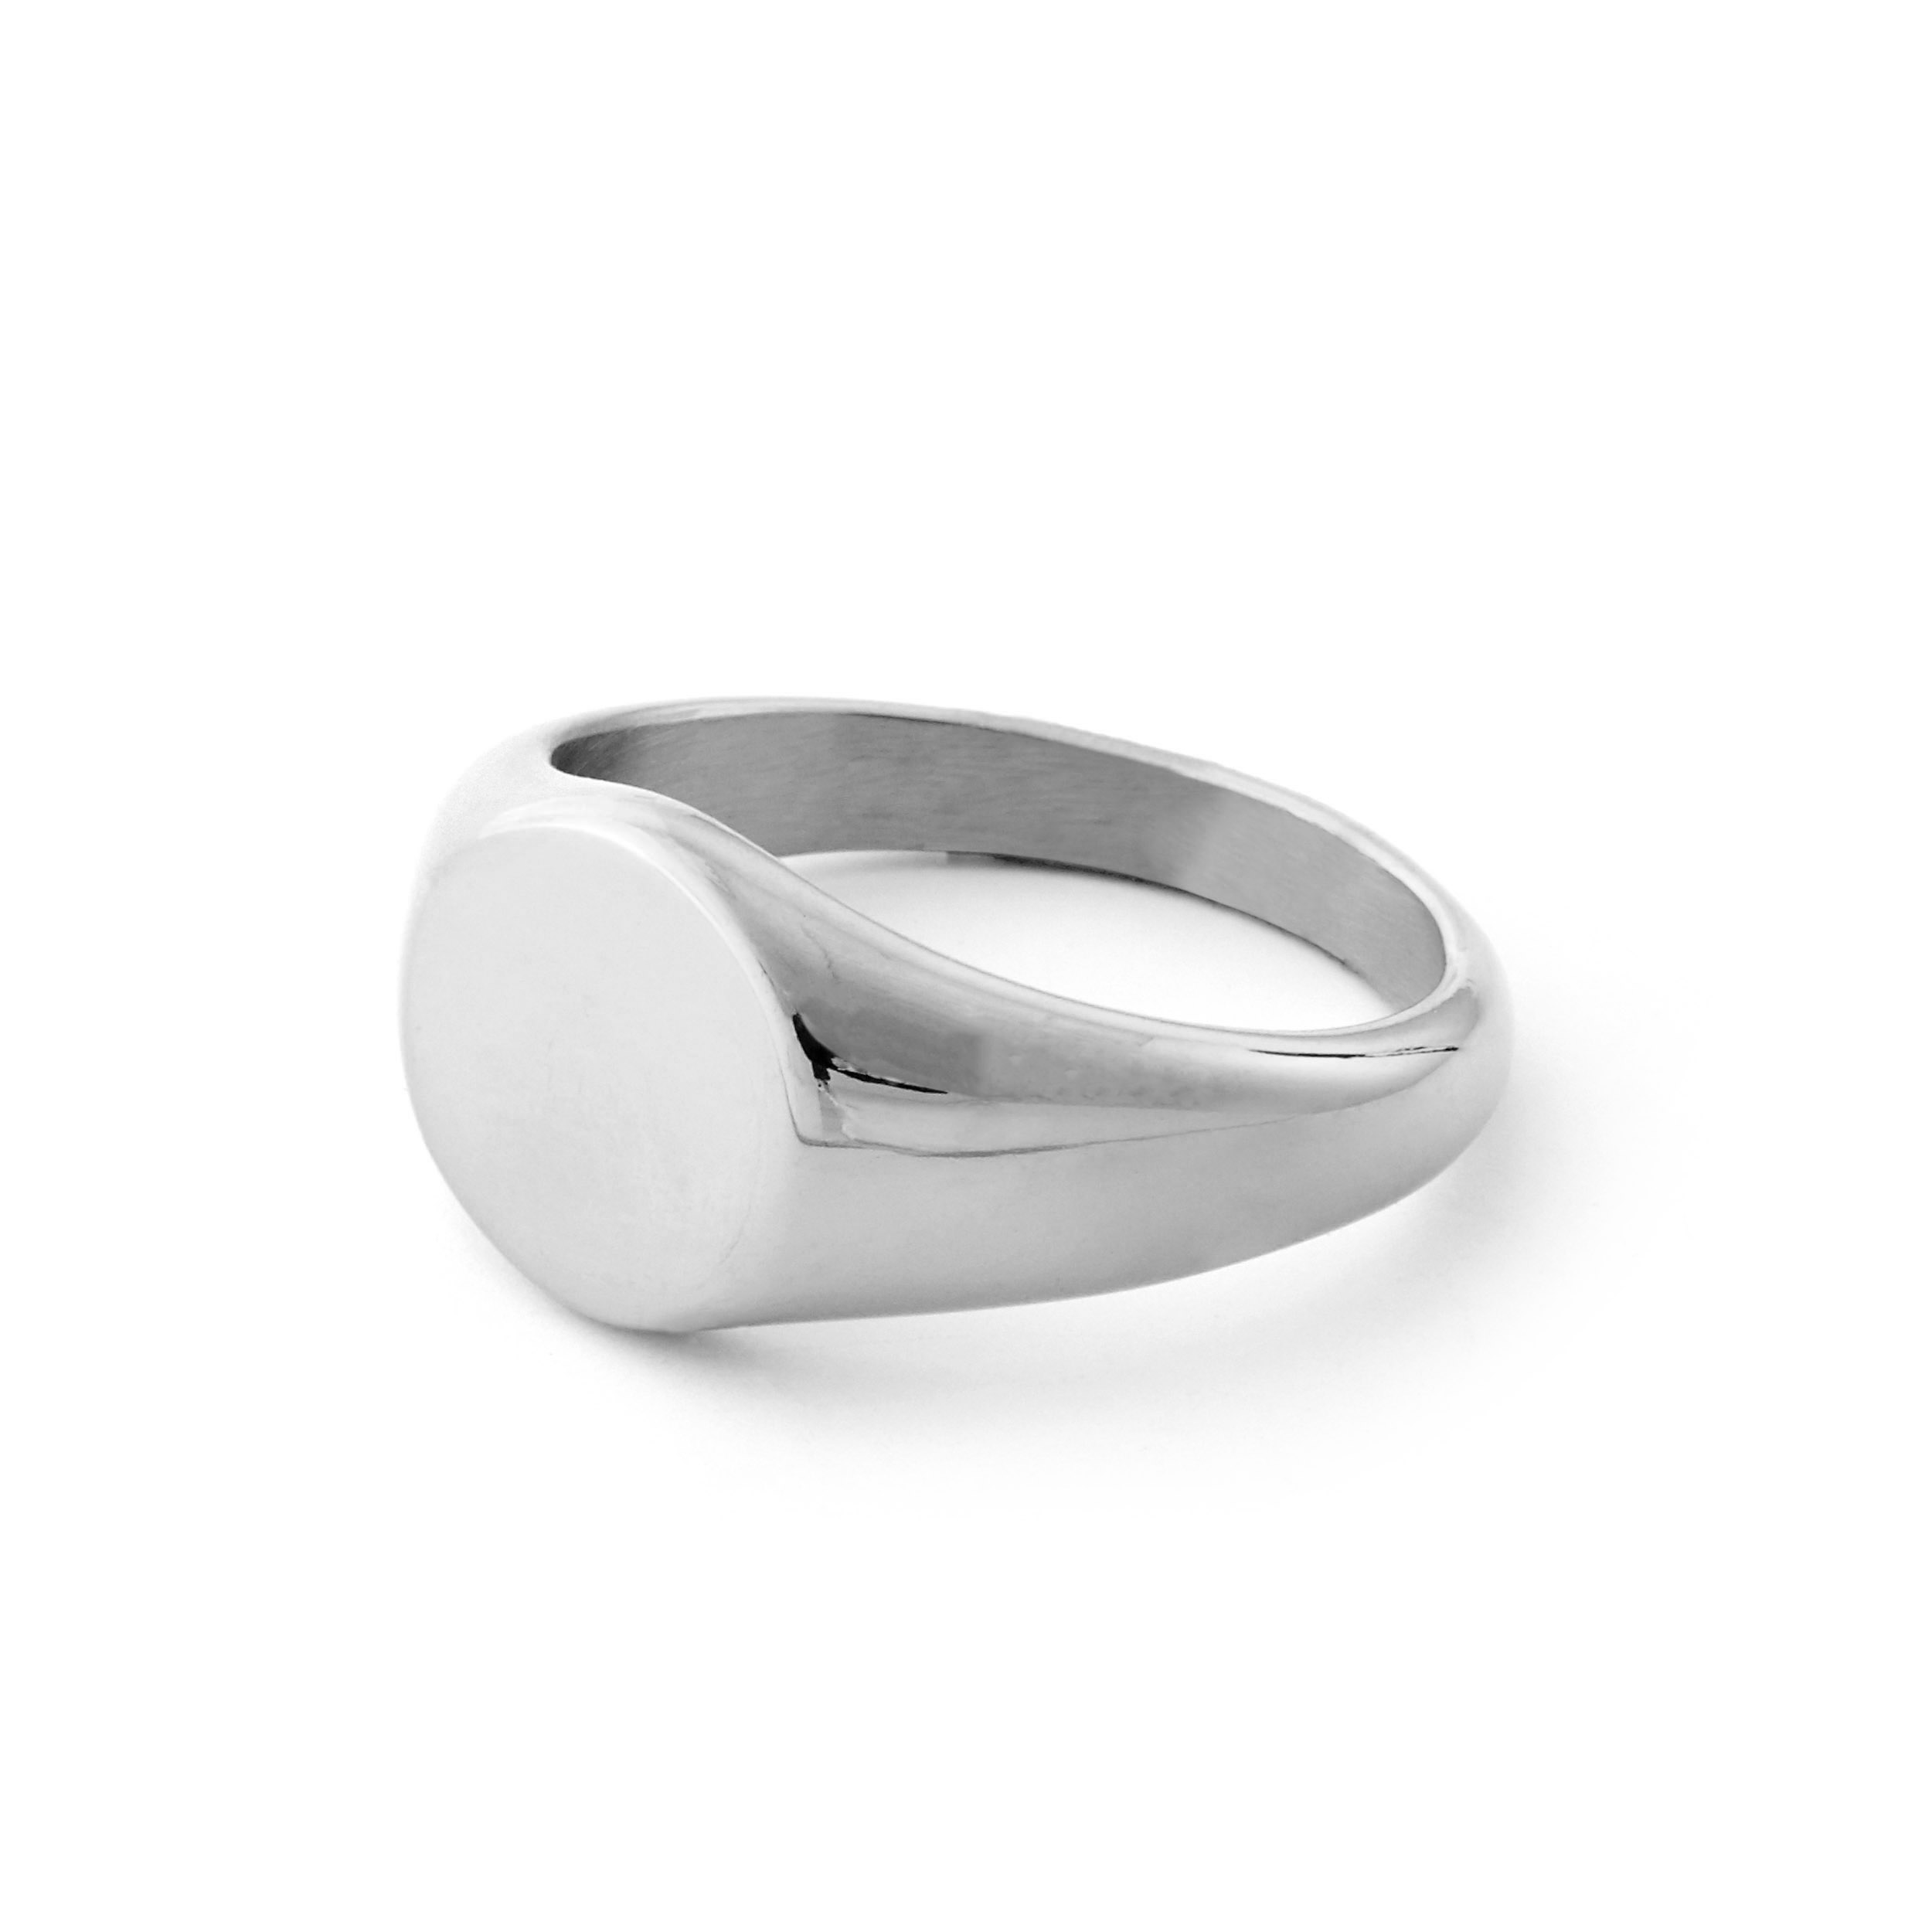 Silver Tone Round Stainless Steel Signet Ring   In stock!   Lucleon